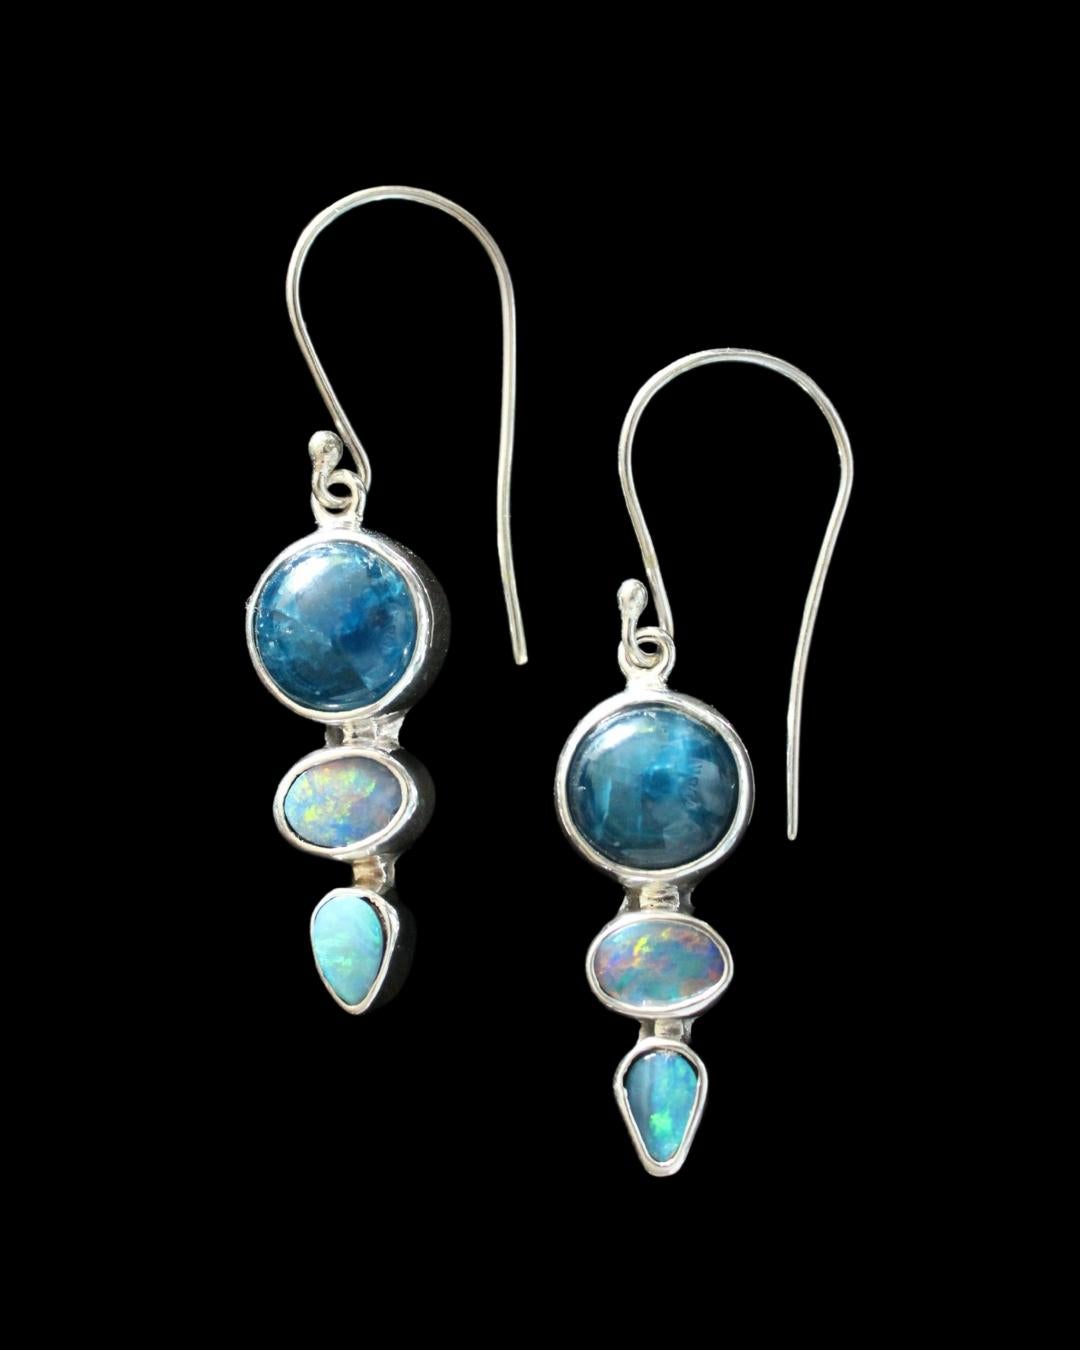 These delightful earrings feature round kyanite cabochons with oval and teardrop Australian opal doublets stones. The light blue iridescent opals compliment the deeper blue of the kyanite. They hang gracefully with French hook sterling silver ear